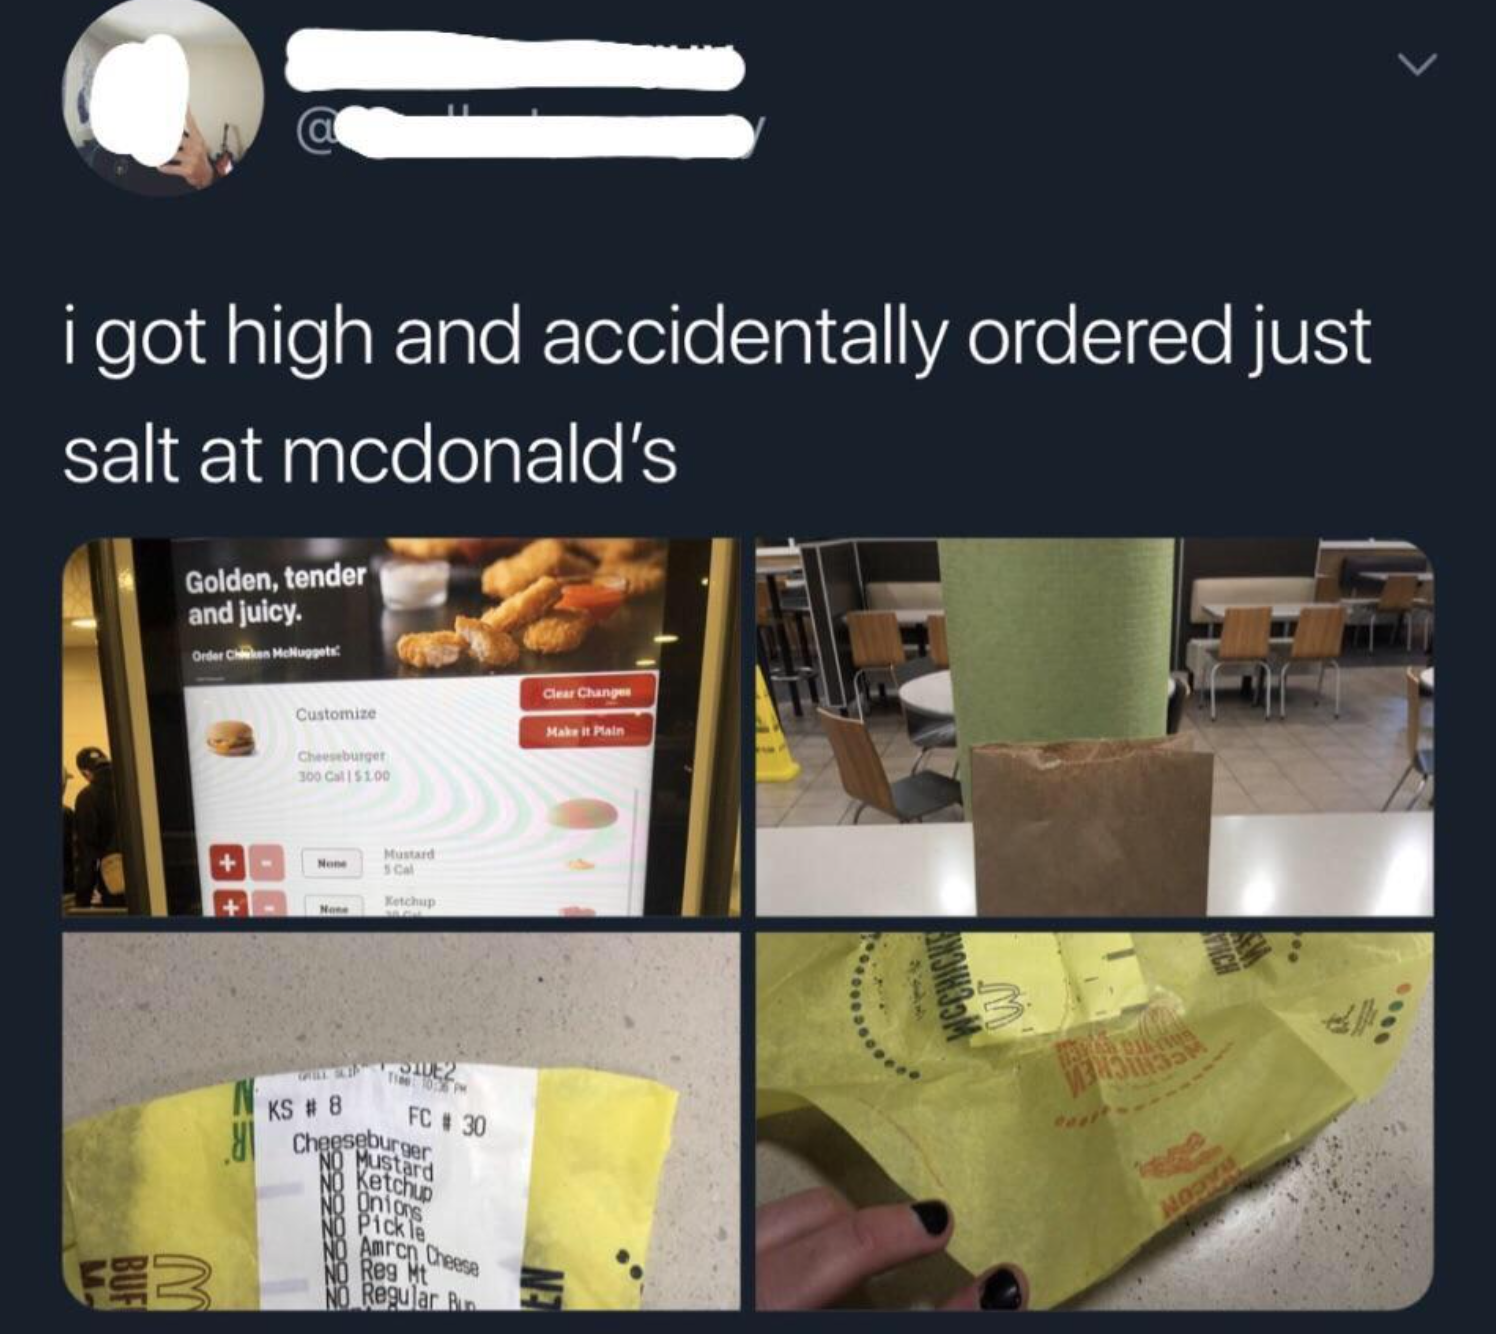 person who just ordered salt from mcdonalds